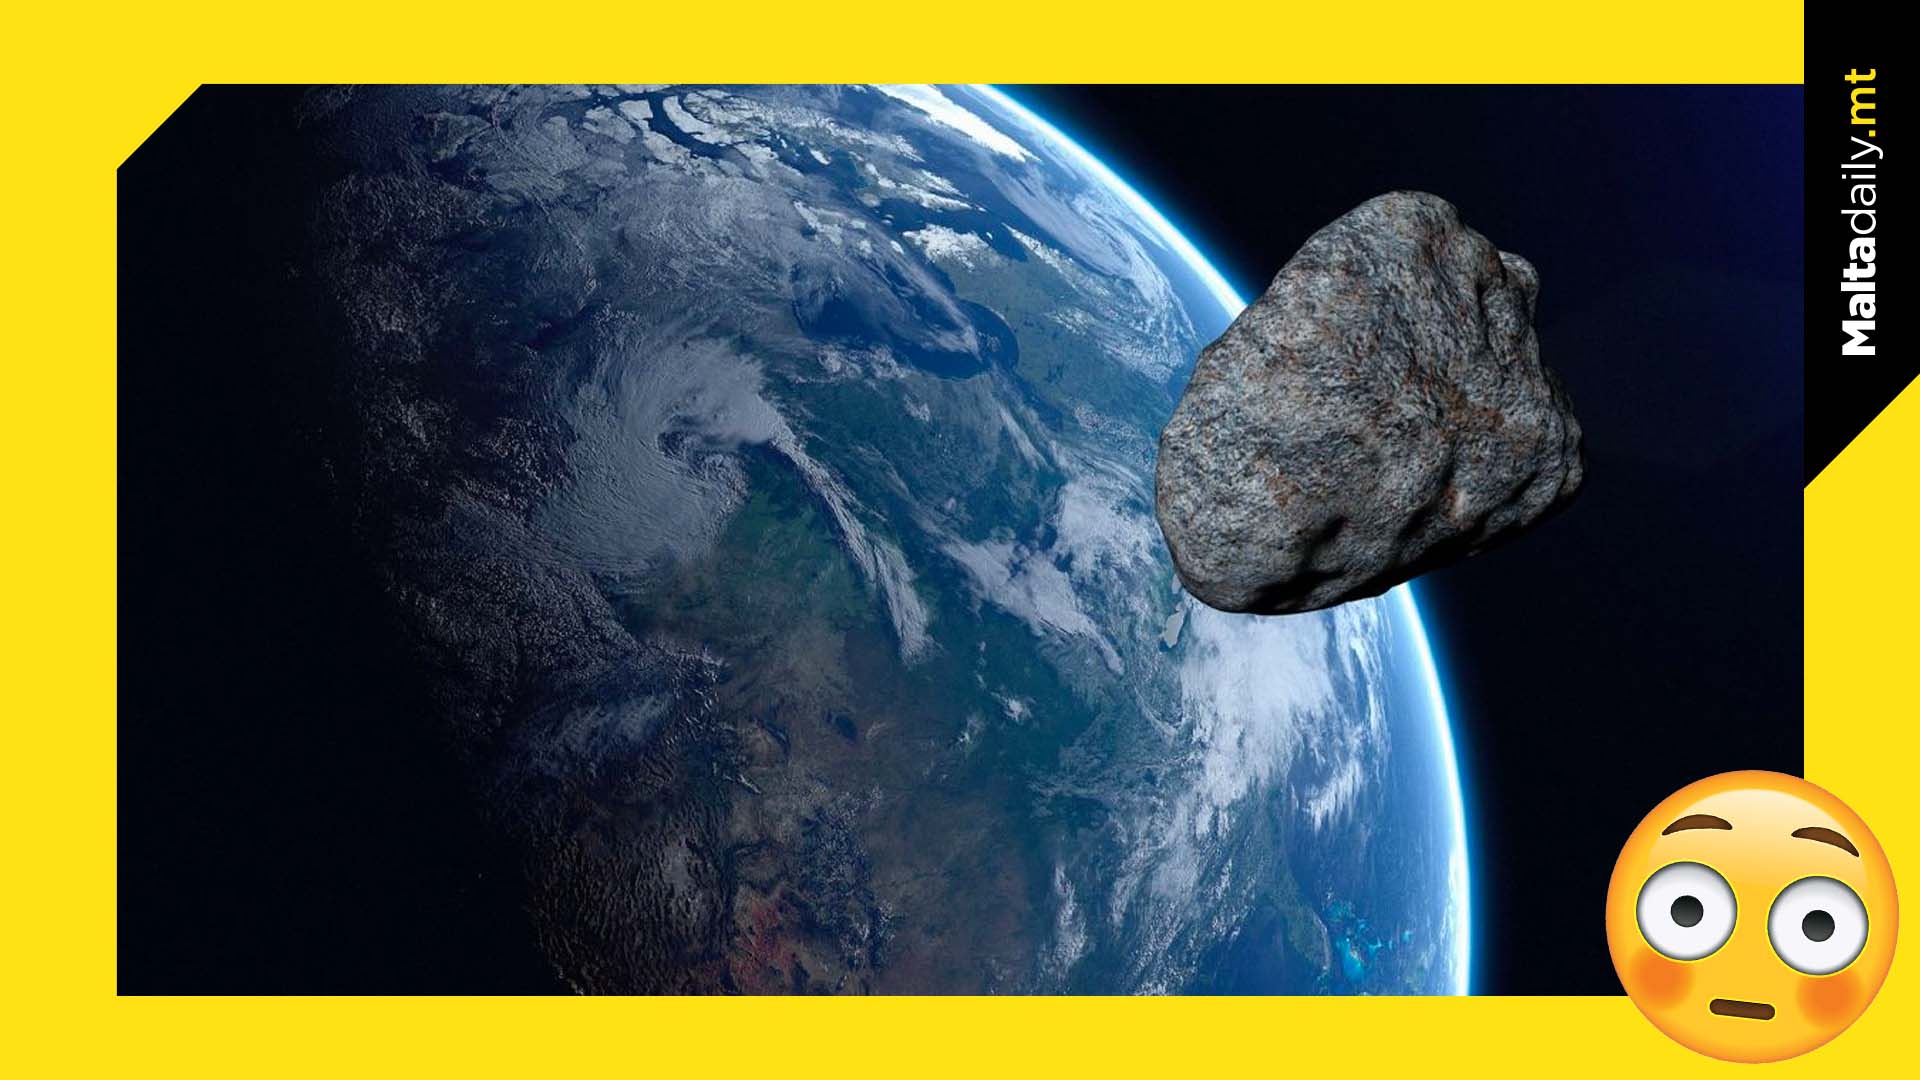 Asteroid to pass earth closer than some satellites in orbit